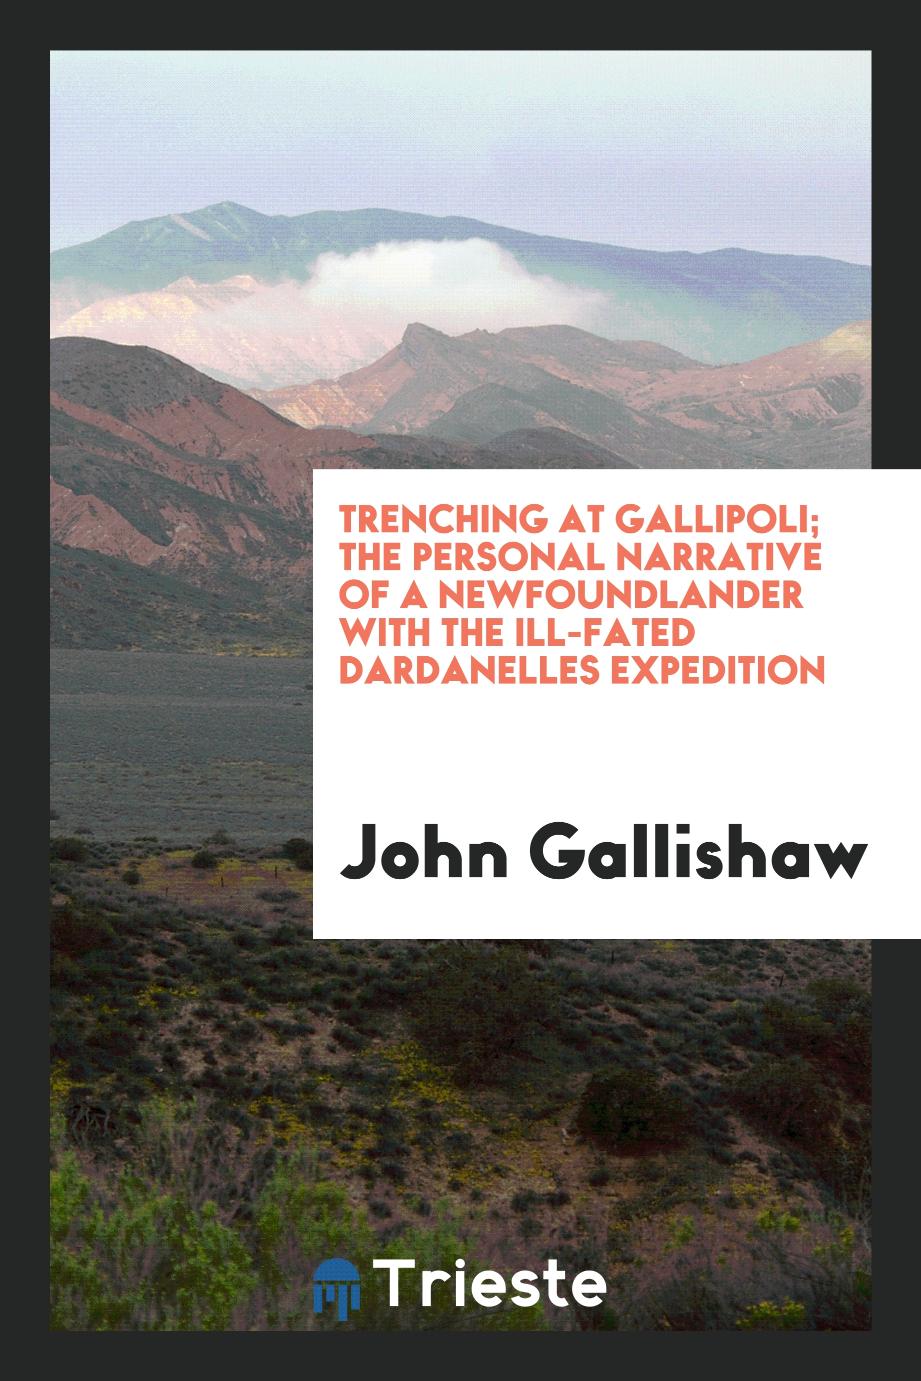 Trenching at Gallipoli; the personal narrative of a Newfoundlander with the ill-fated Dardanelles expedition